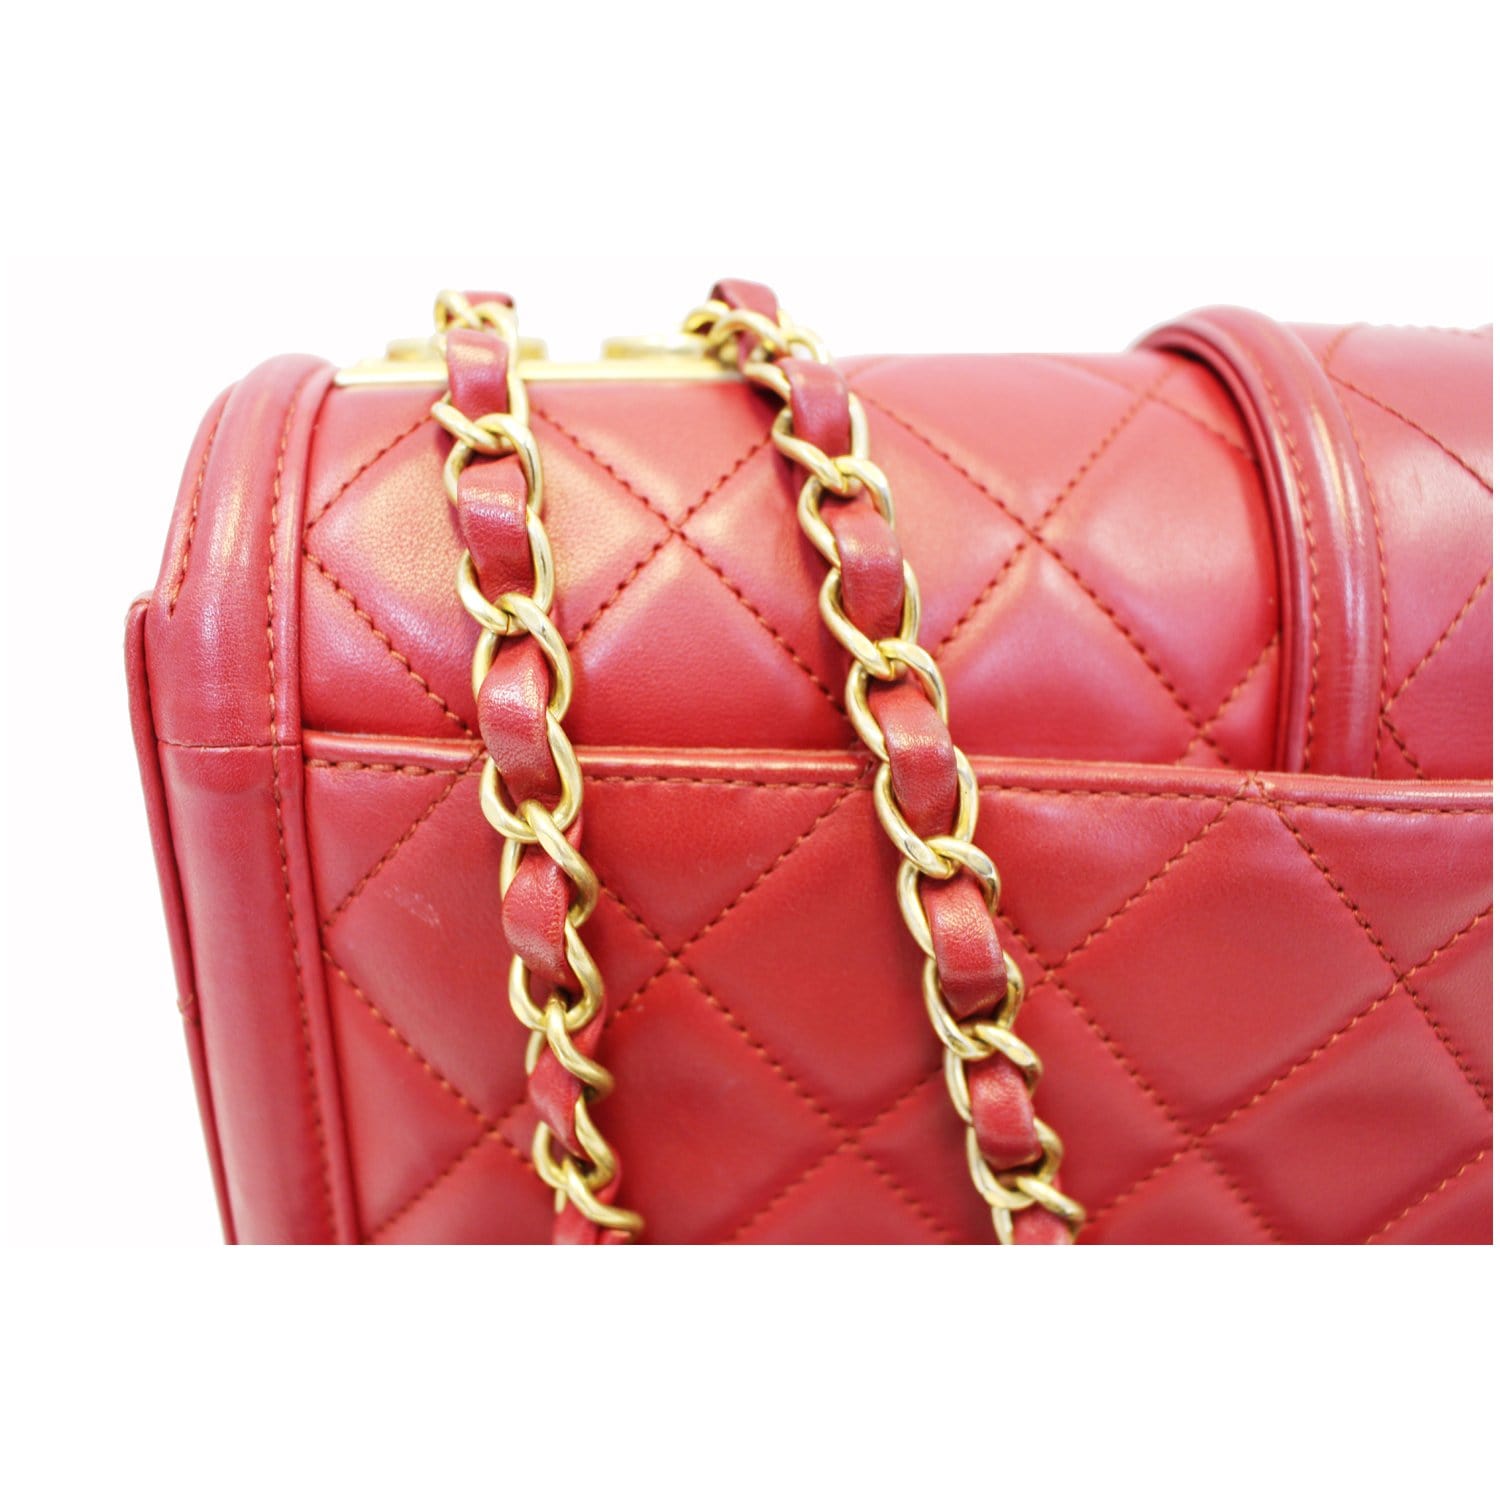 Best Alternatives To The Chanel Flap Bag